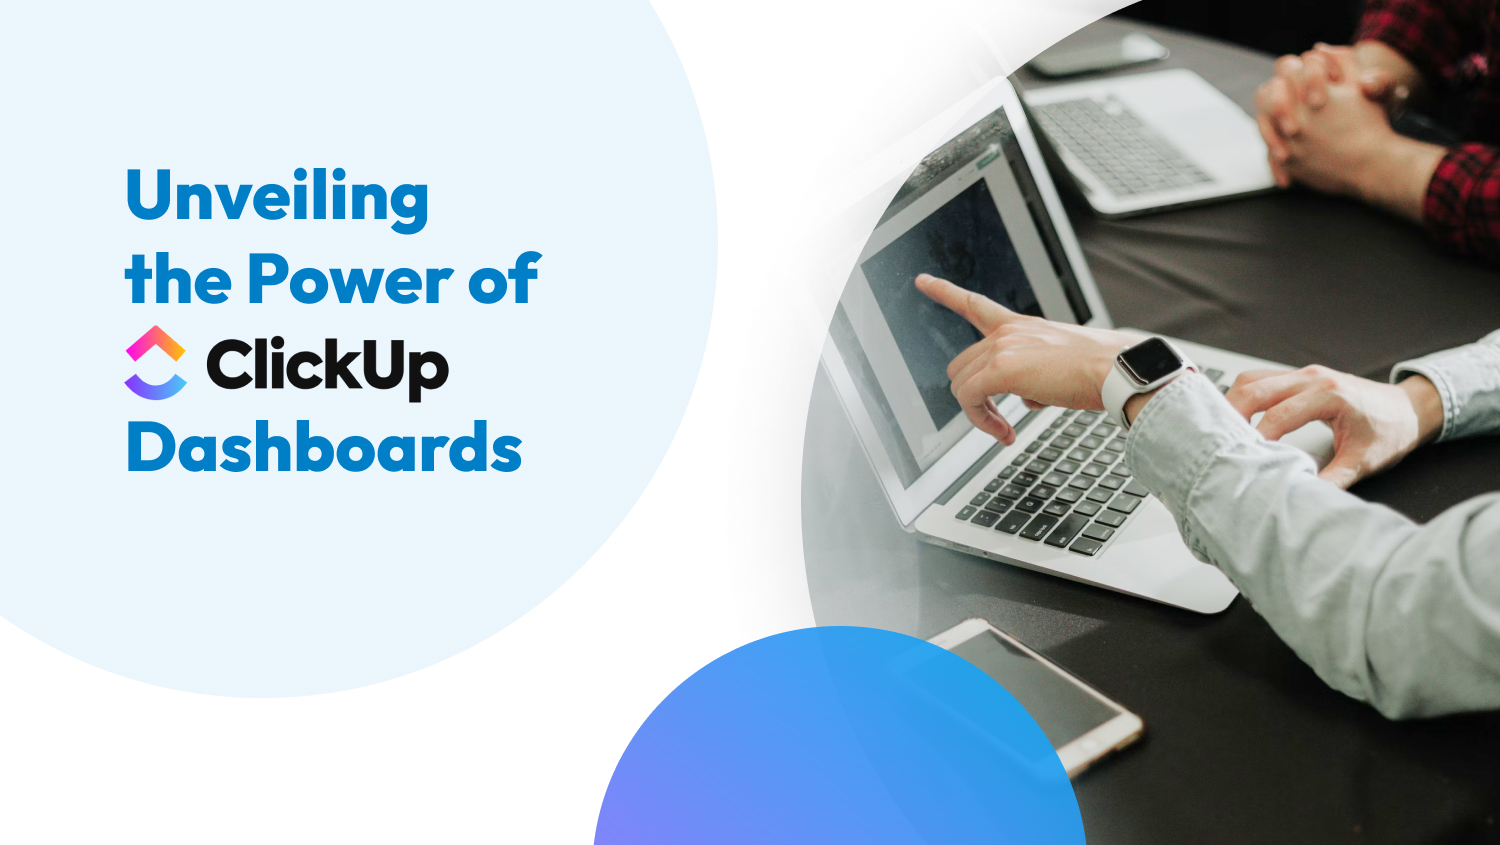 Unveiling the Power of ClickUp Dashboards